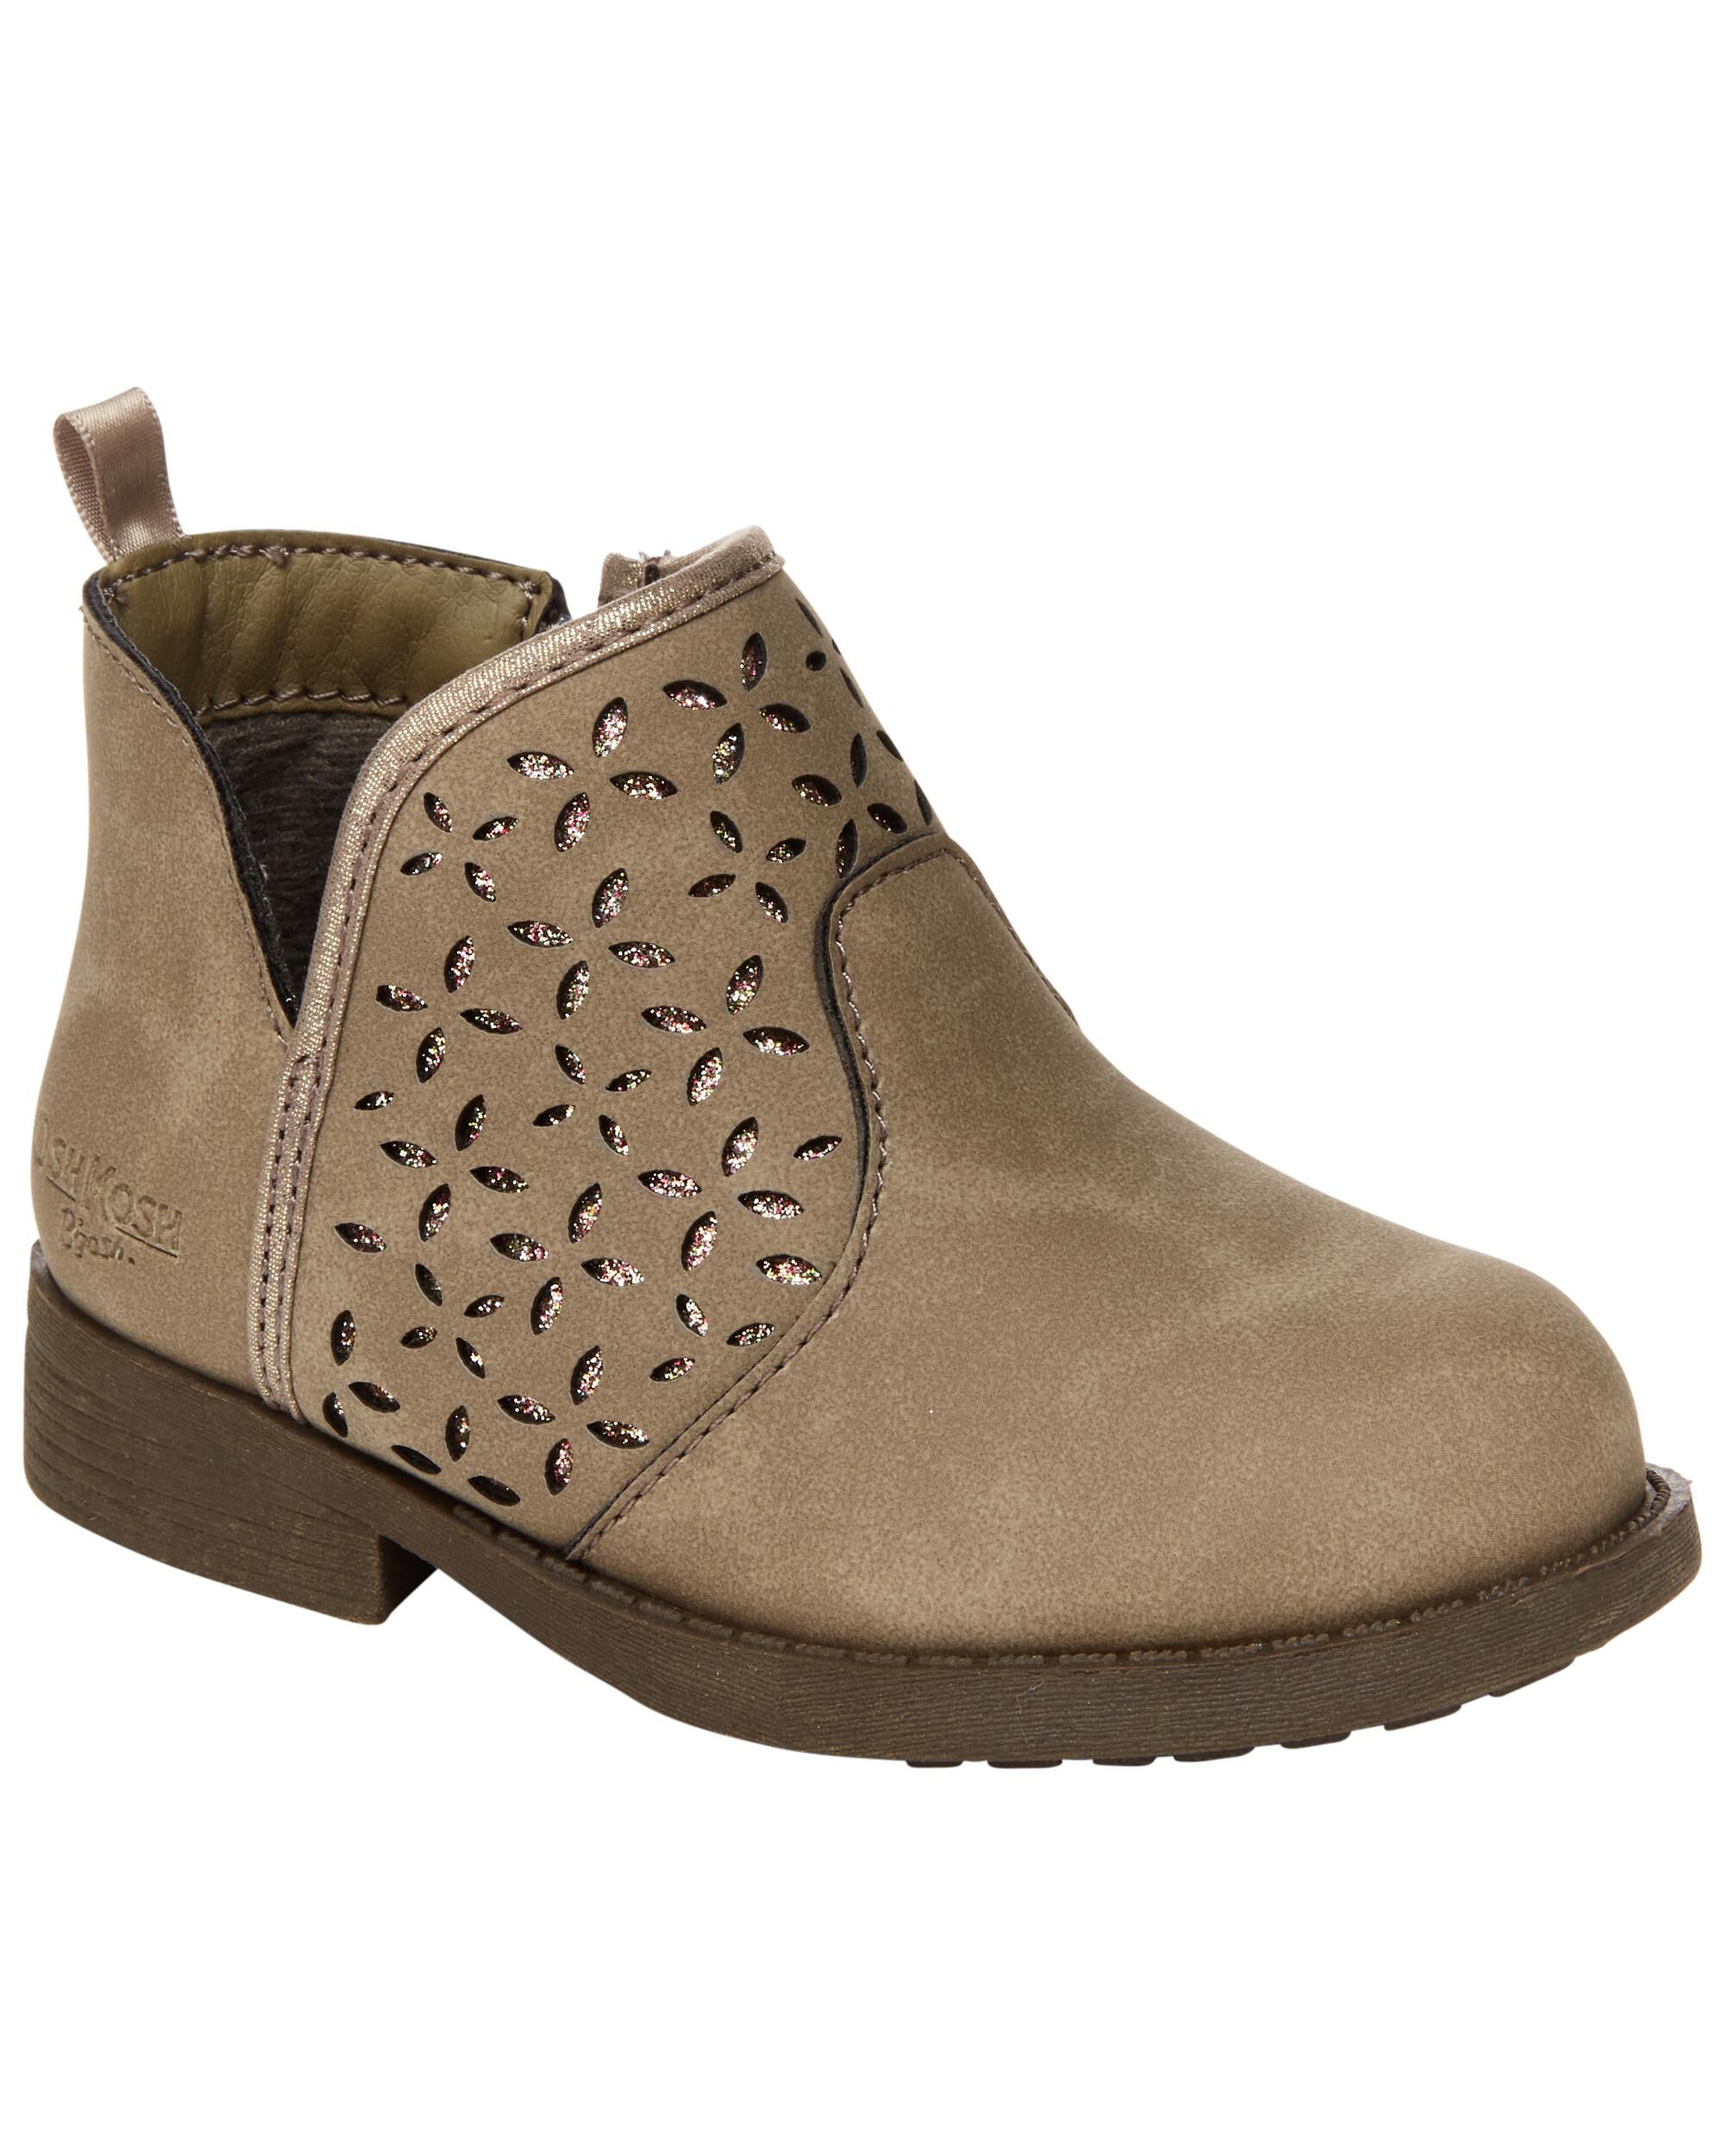 Carters Toddler Estell Fashion Boots